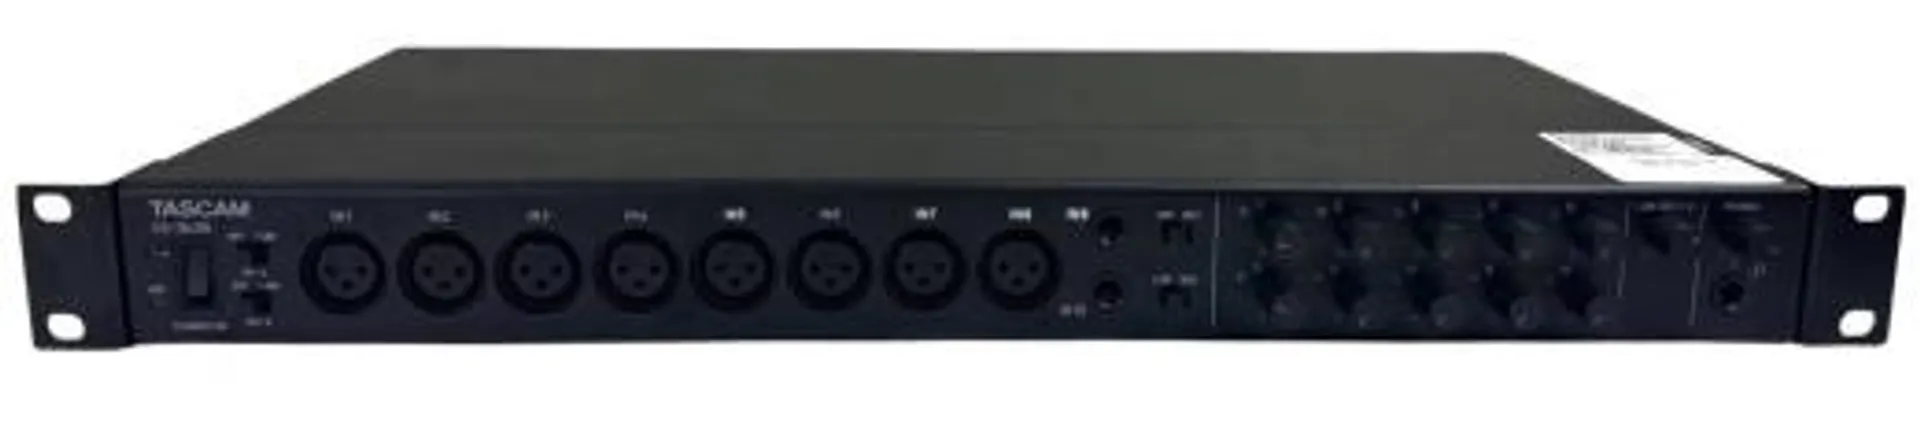 TASCAM 16X8 CHANNEL USB AUDIO INTERFACE